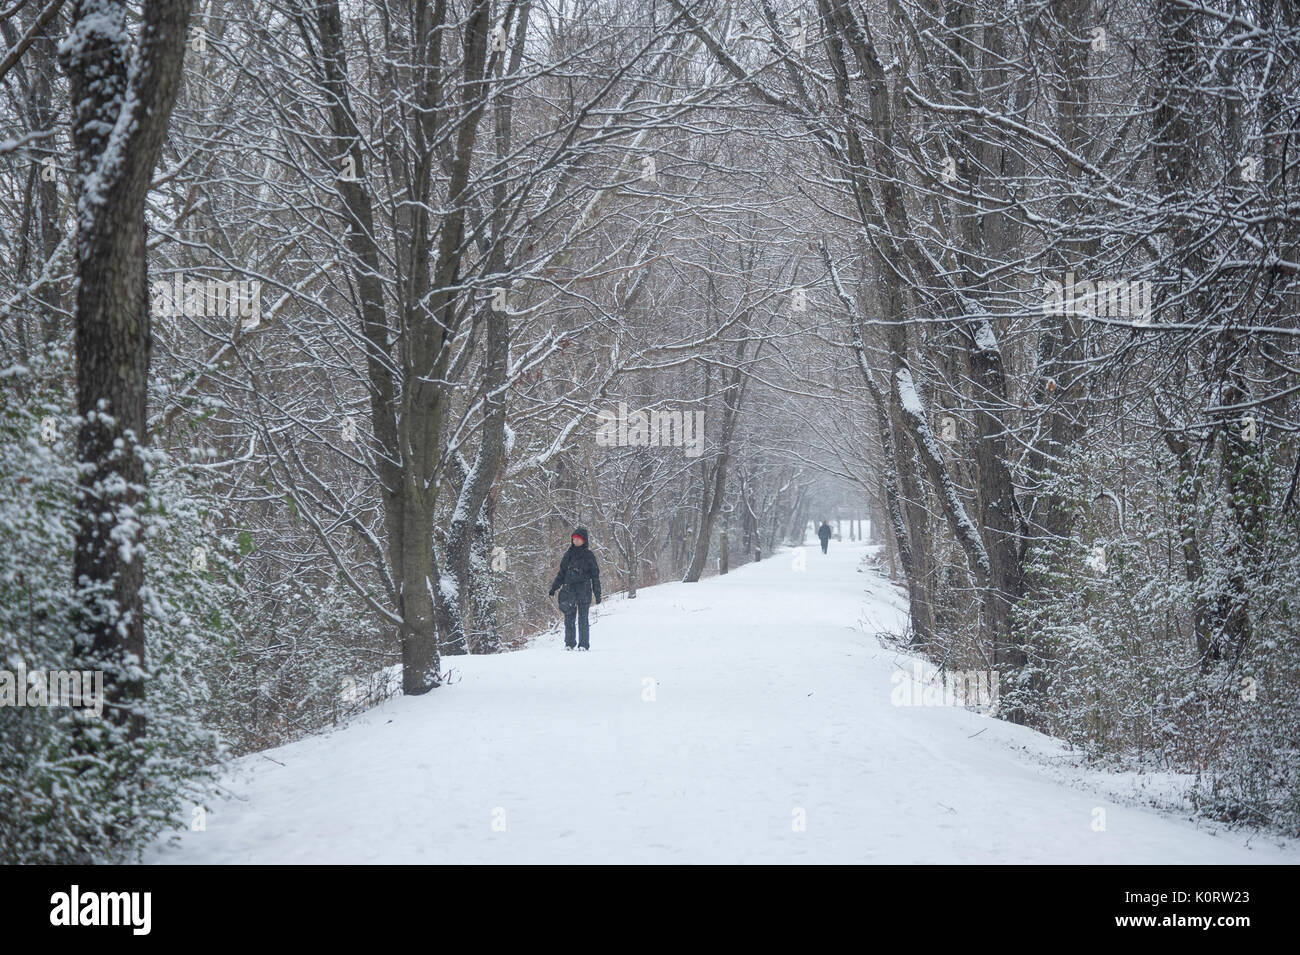 Snow covered tree lined foot path with people walking Stock Photo